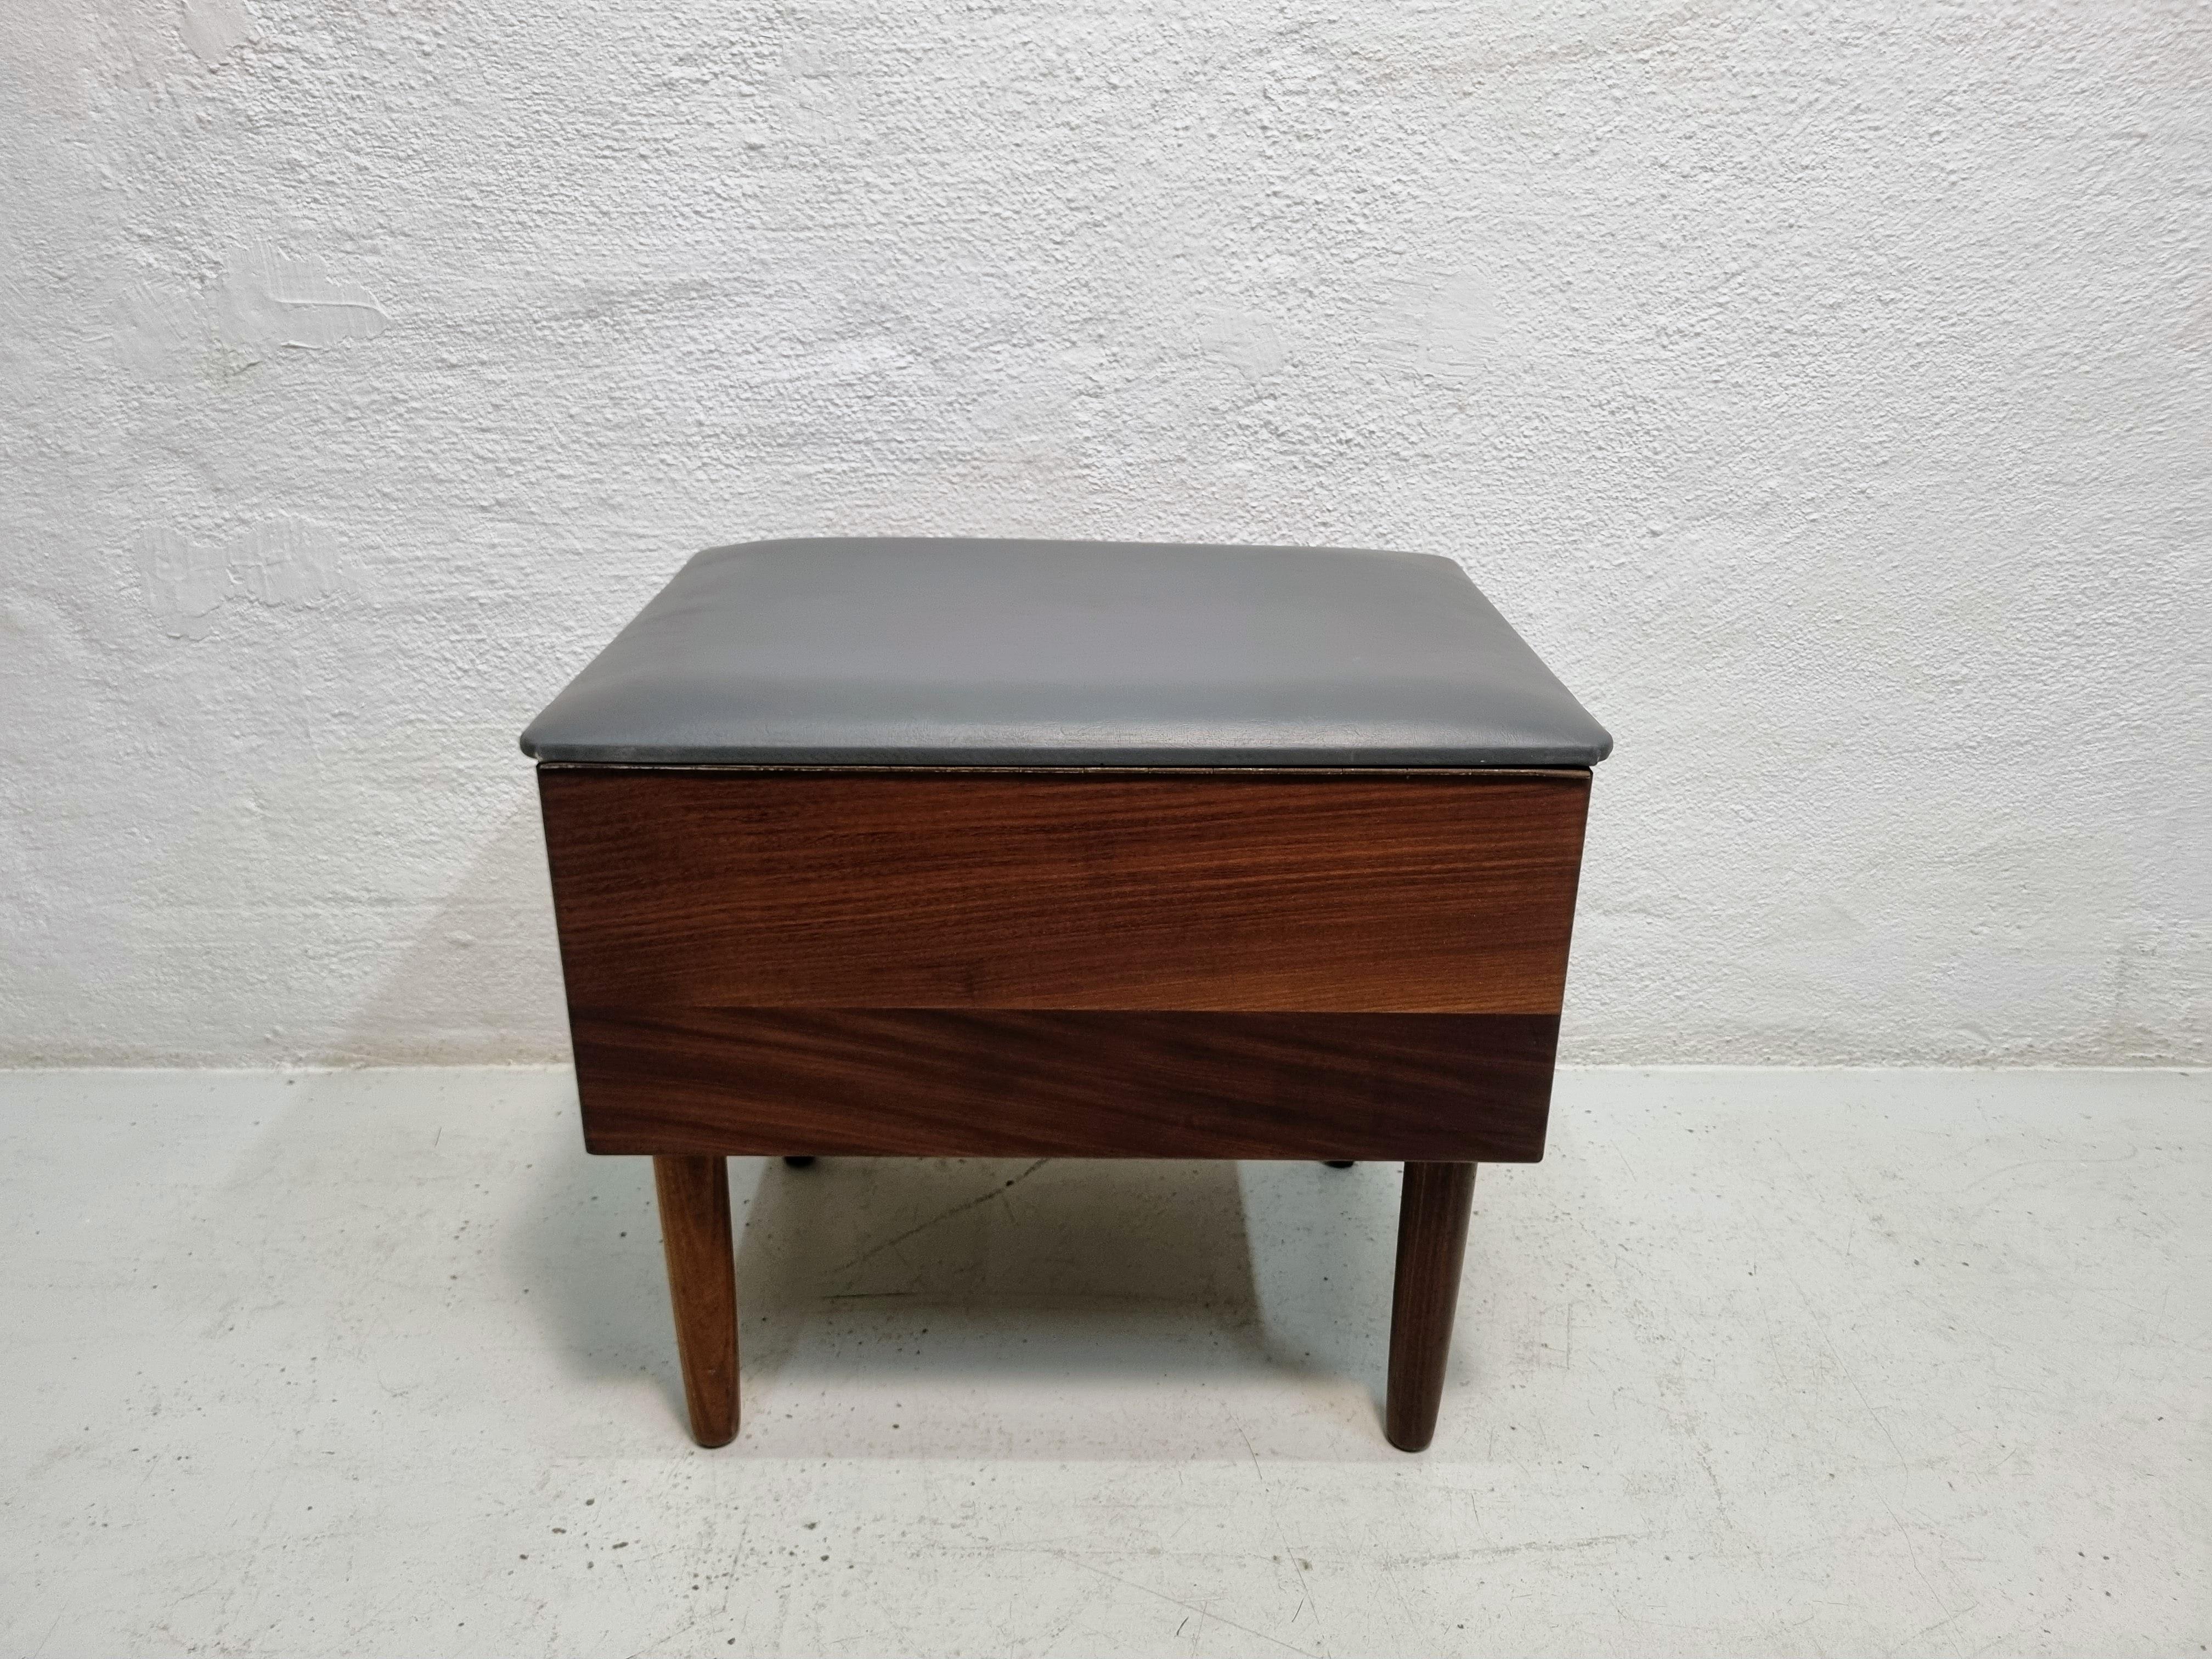 Danish Teak stool with storage compartment For Sale